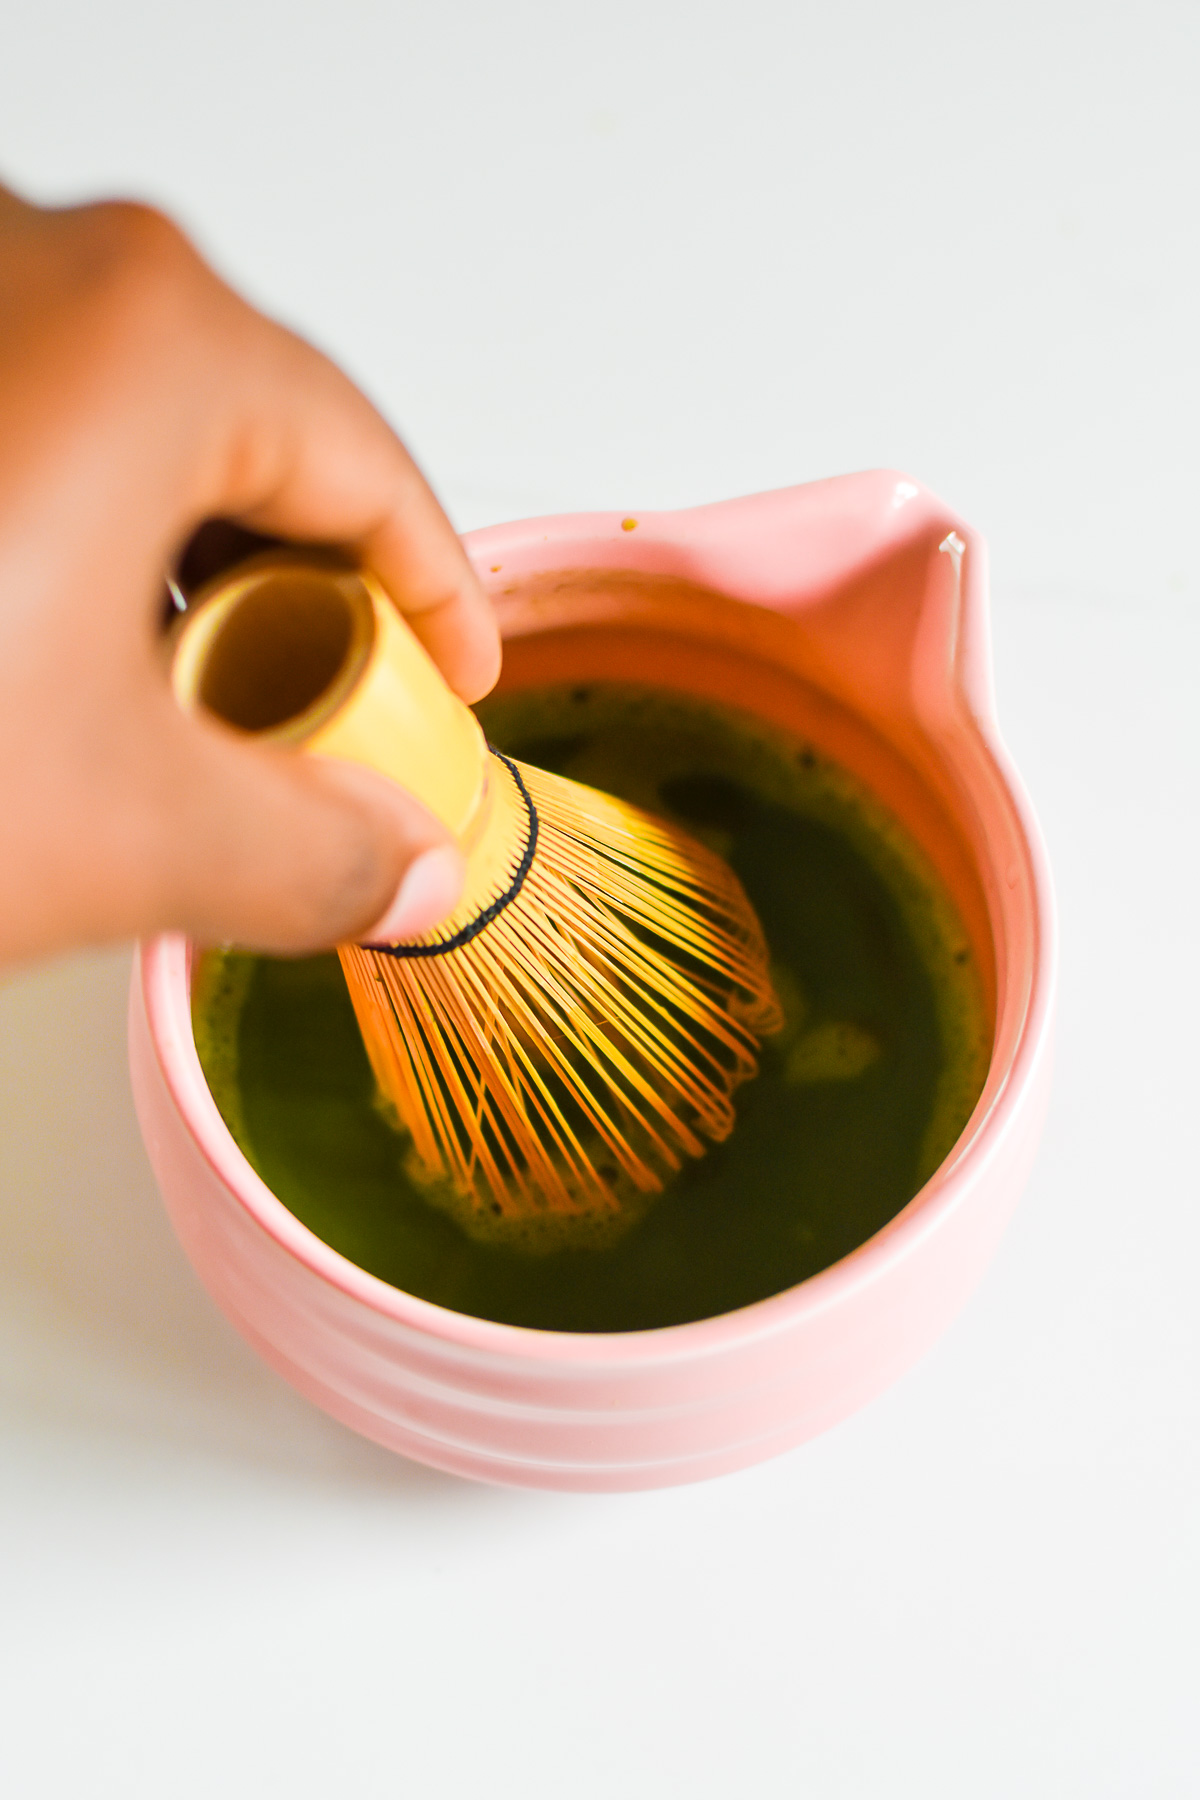 whisking matcha powder and hot water together in pink ceramic bowl.